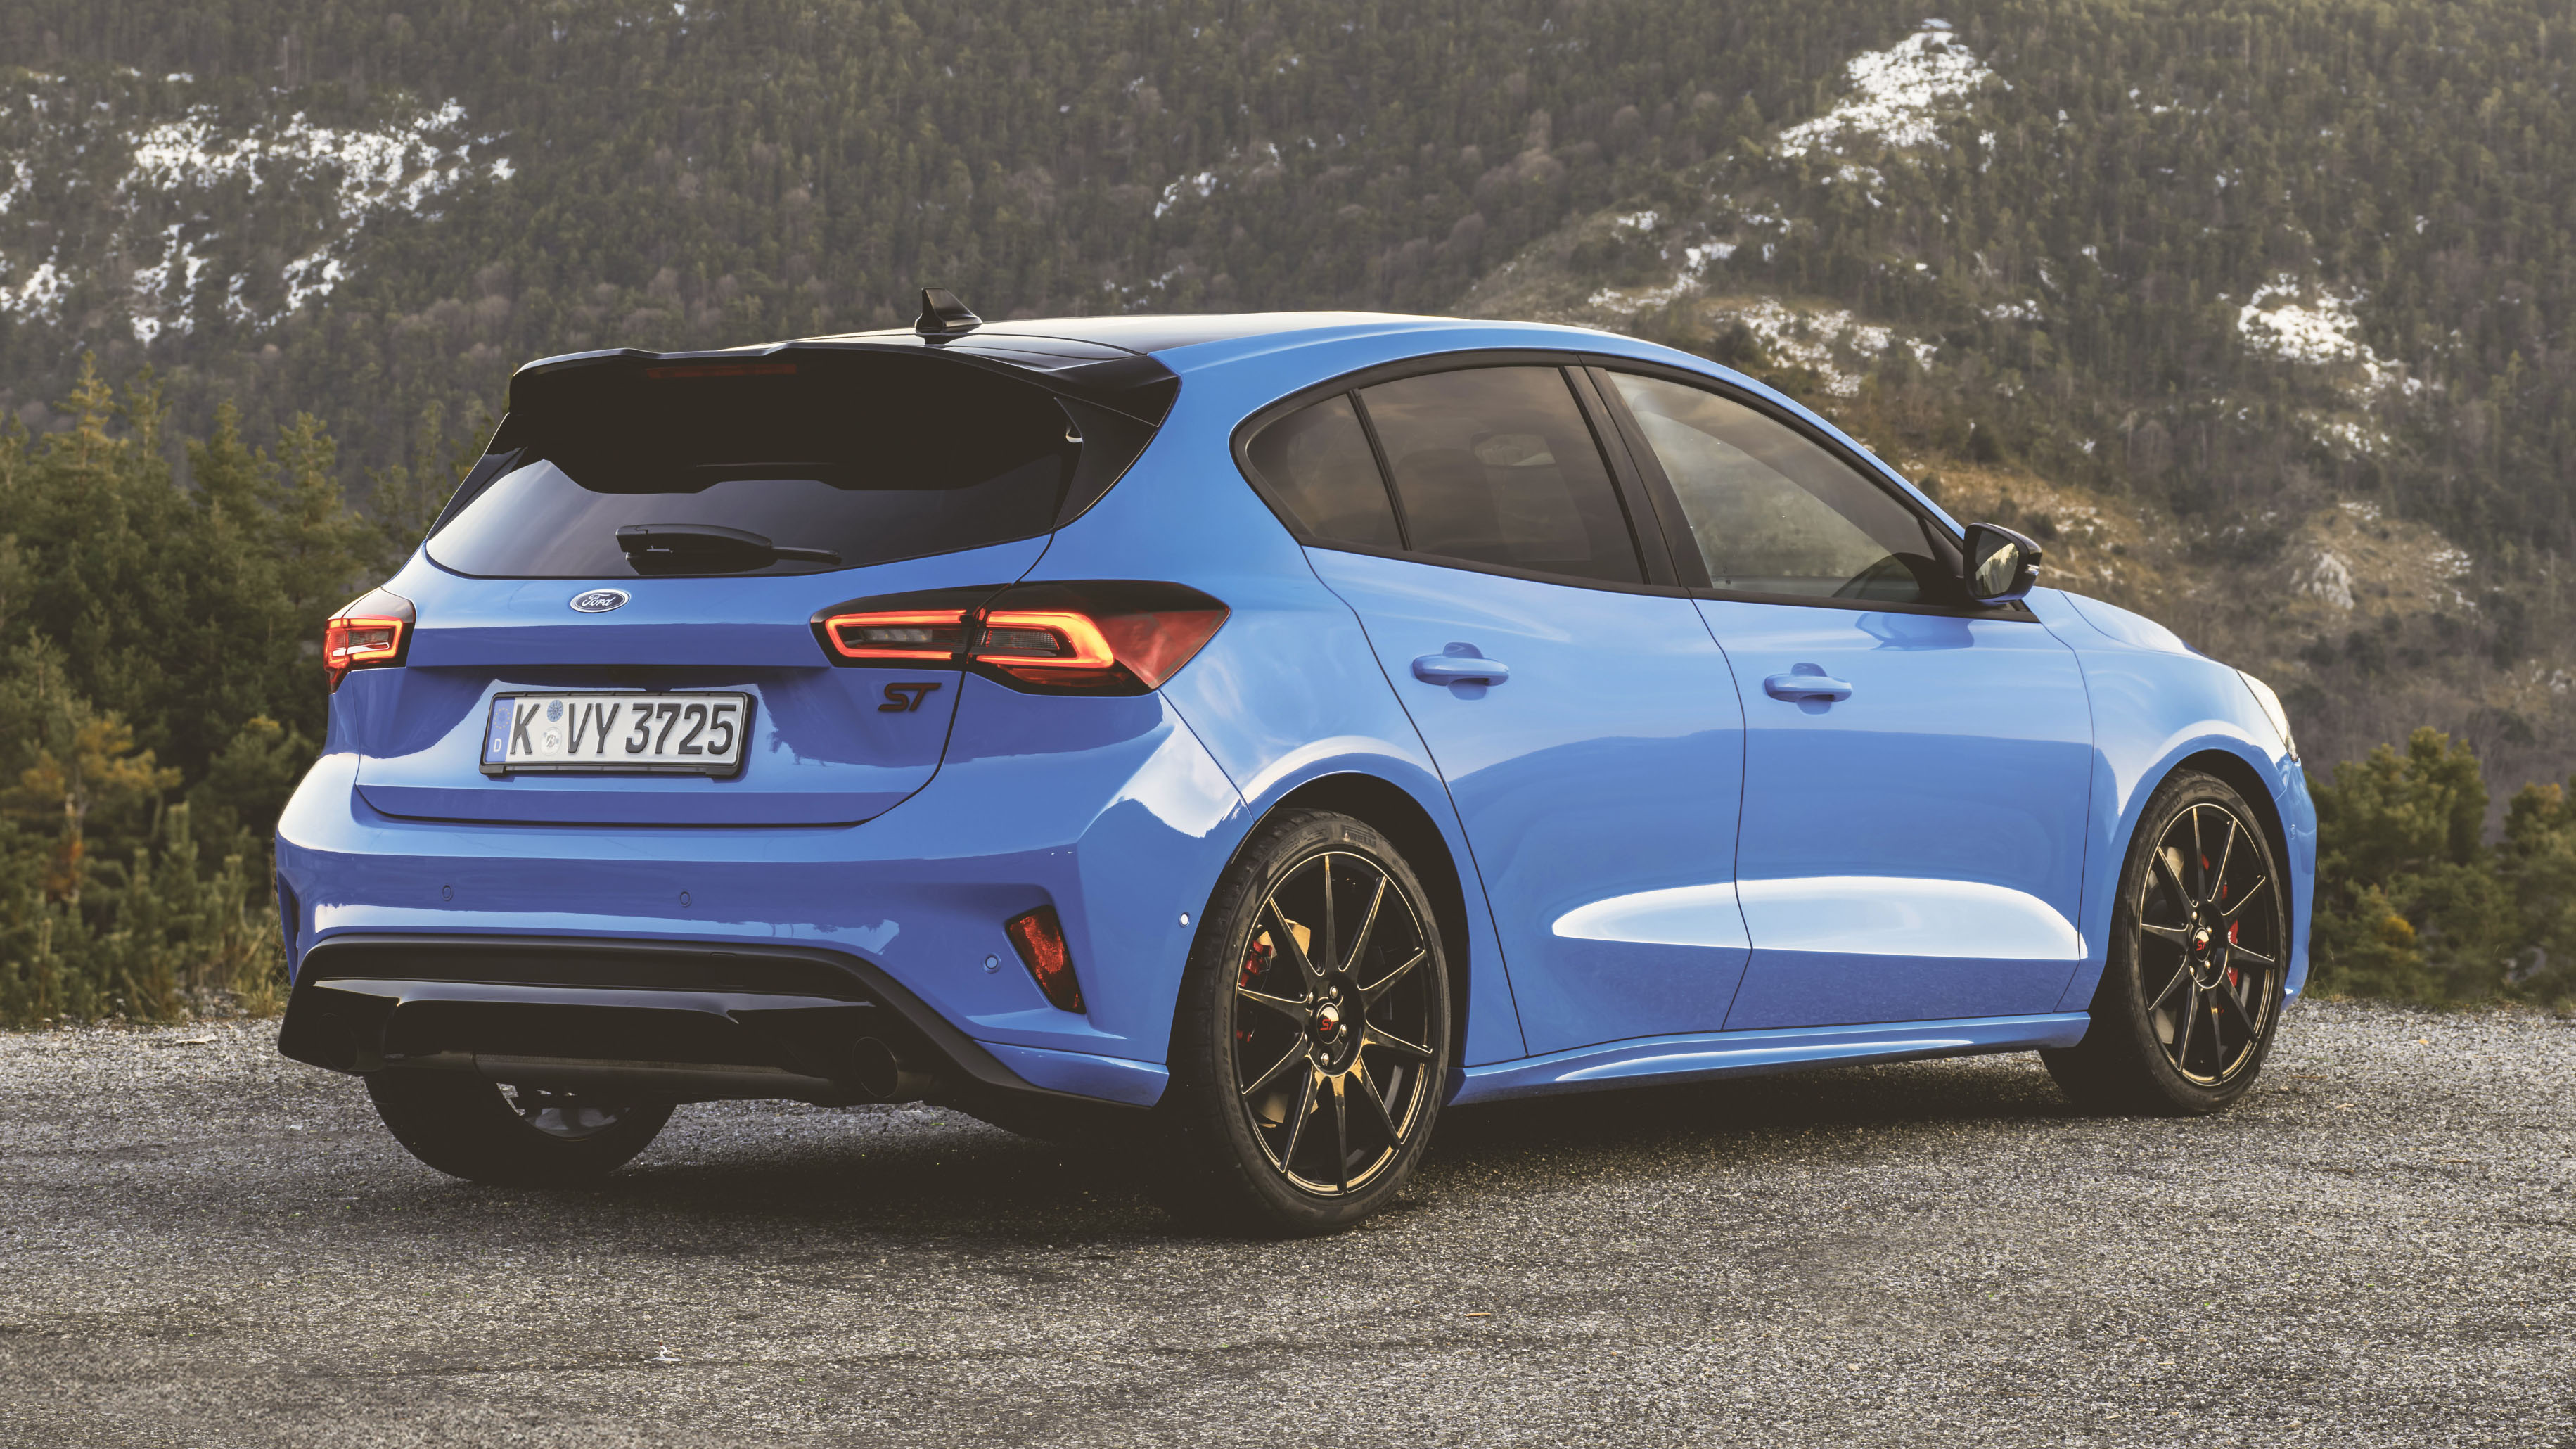 the new ford focus st edition hot hatch gets adjustable suspension